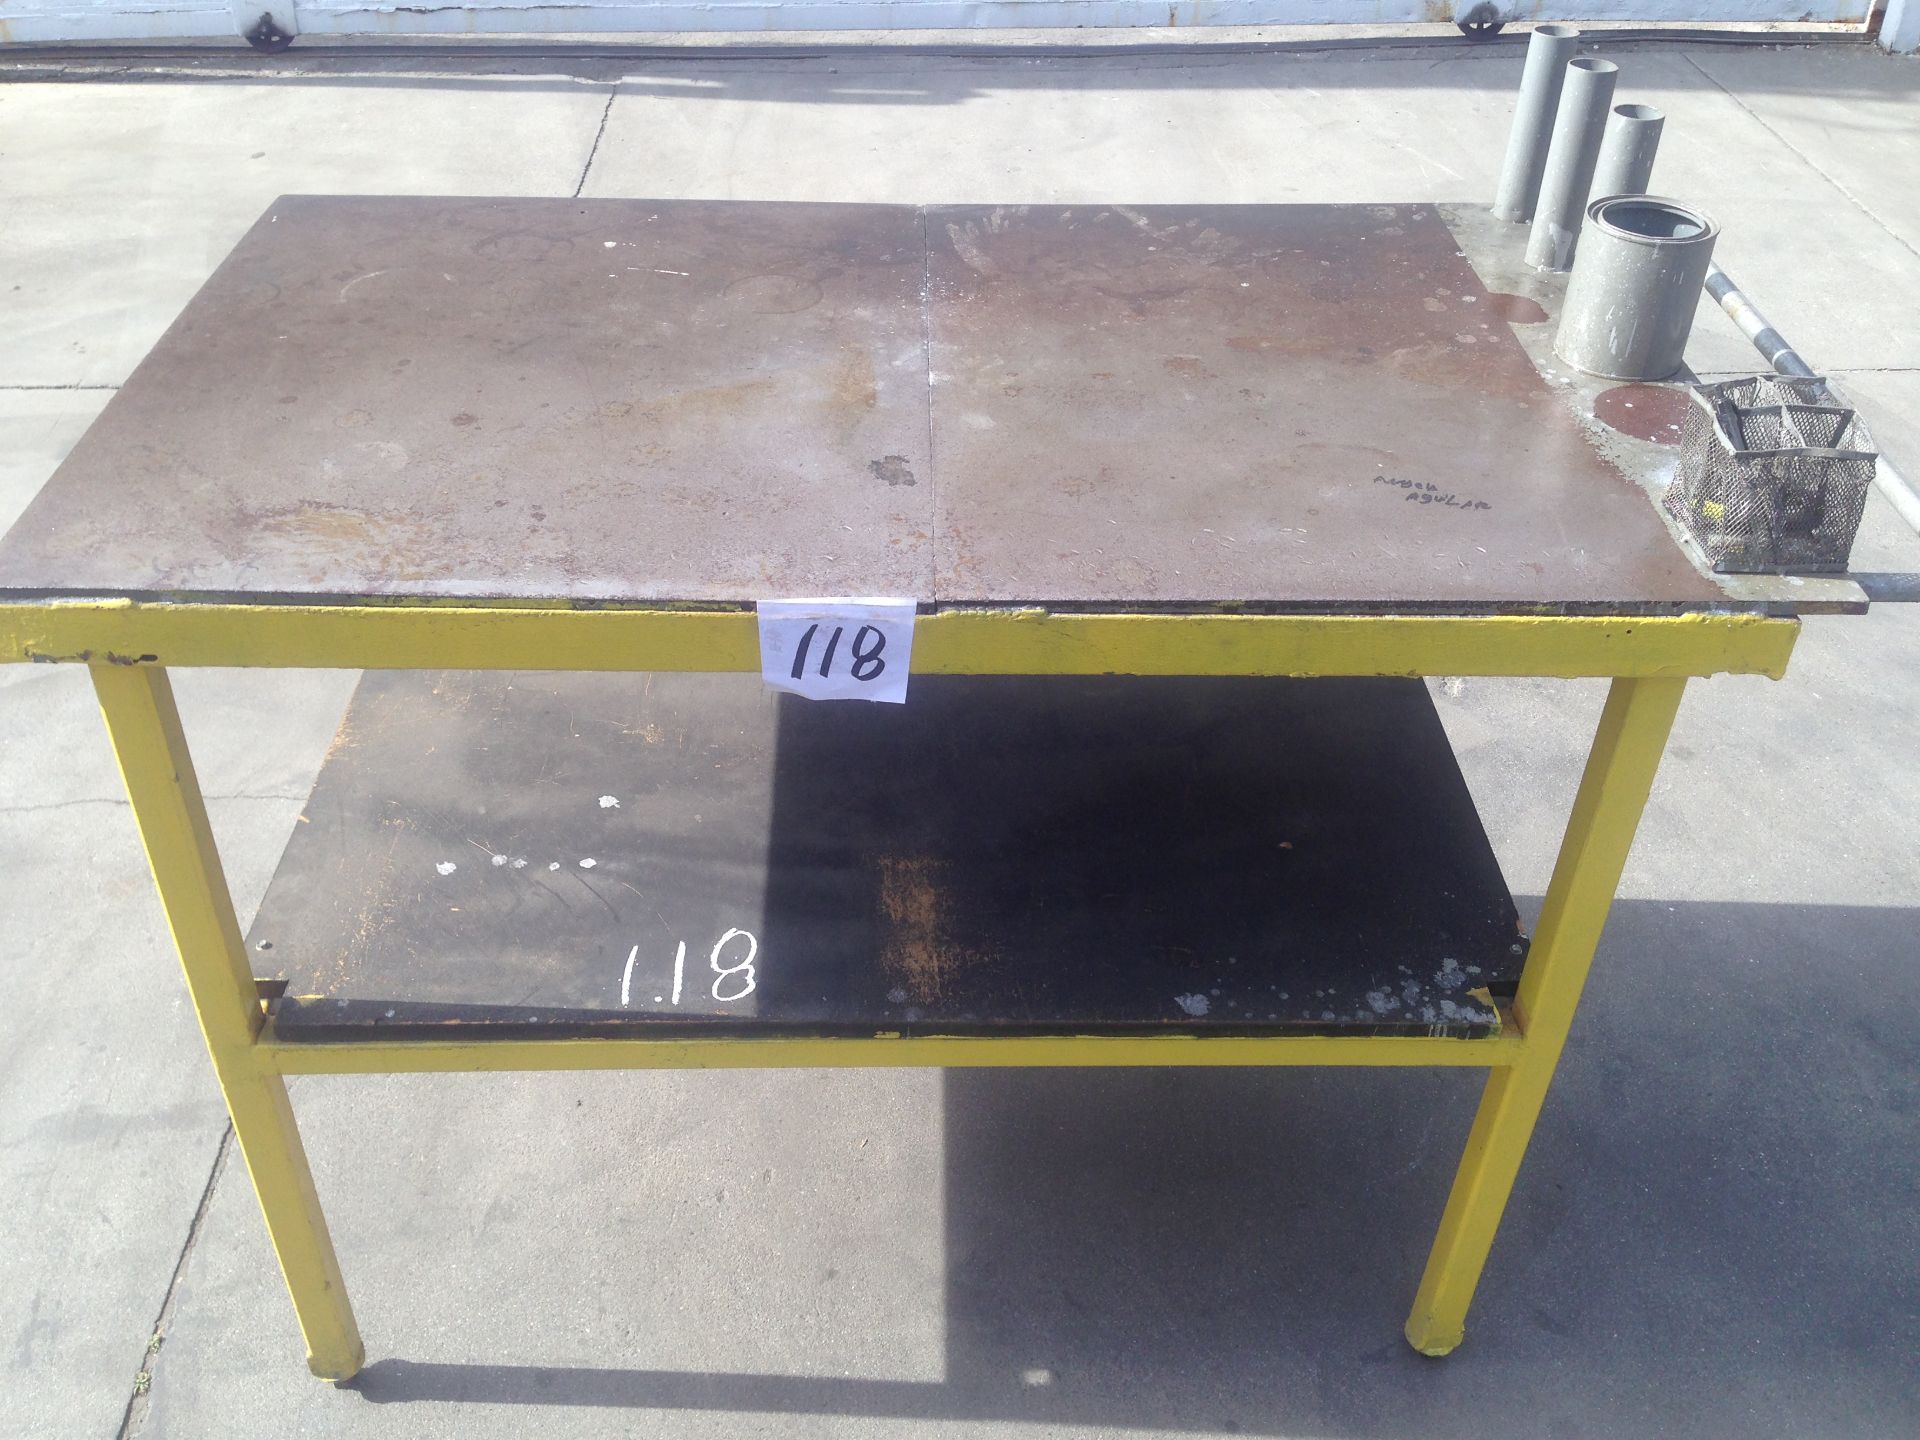 52" X 30" TABLE, 1/2" THICK STEEL TOP, TOOL HOLDERS